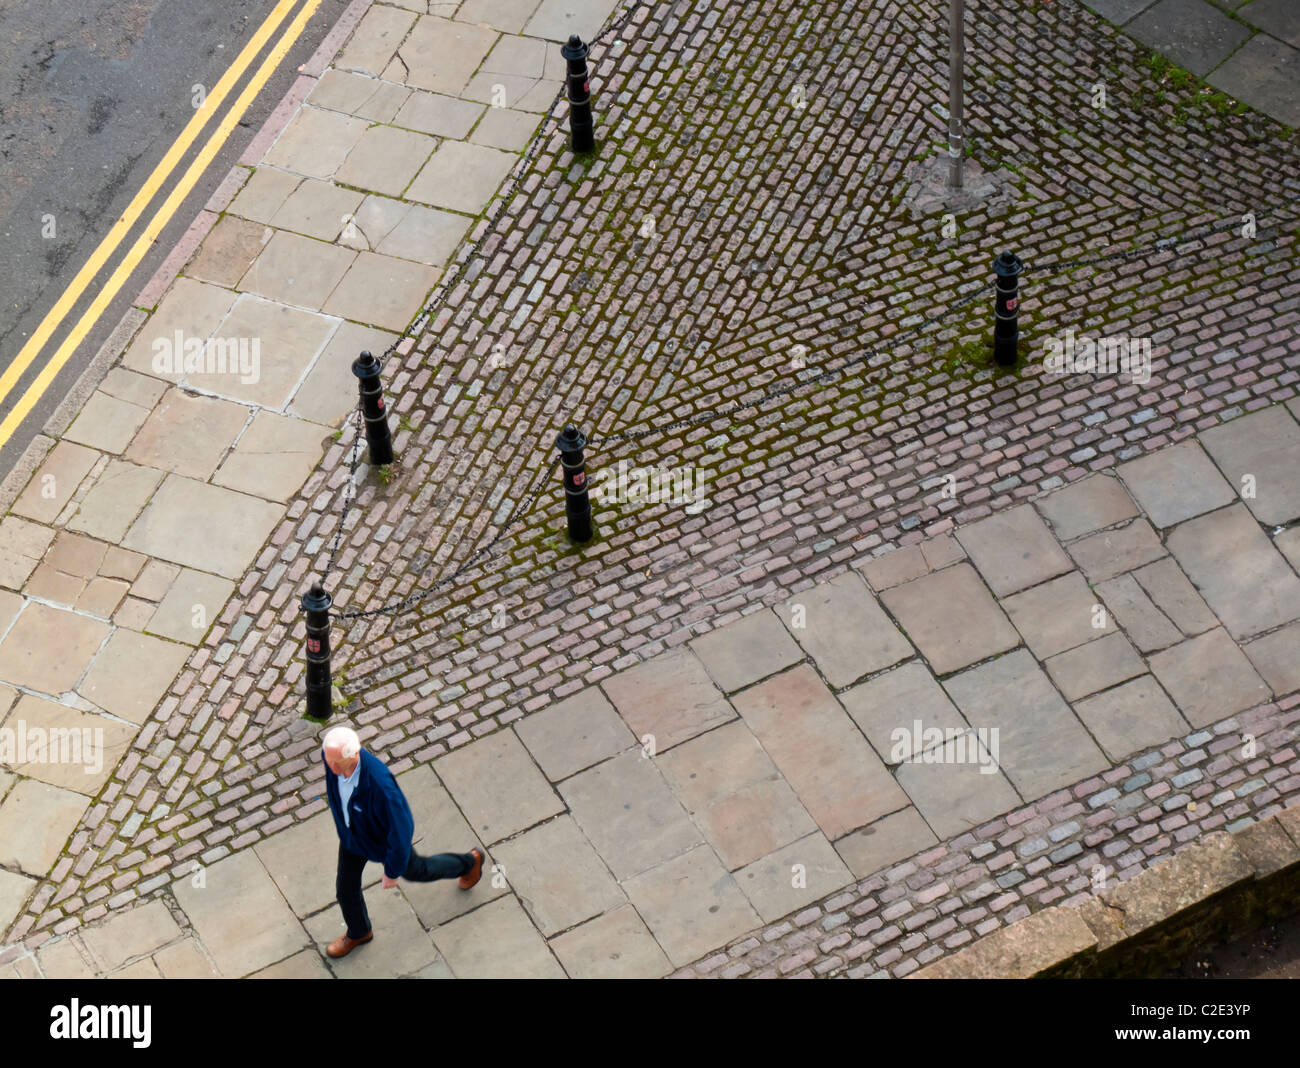 View looking down on  male pedestrian walking down a street in the UK Stock Photo